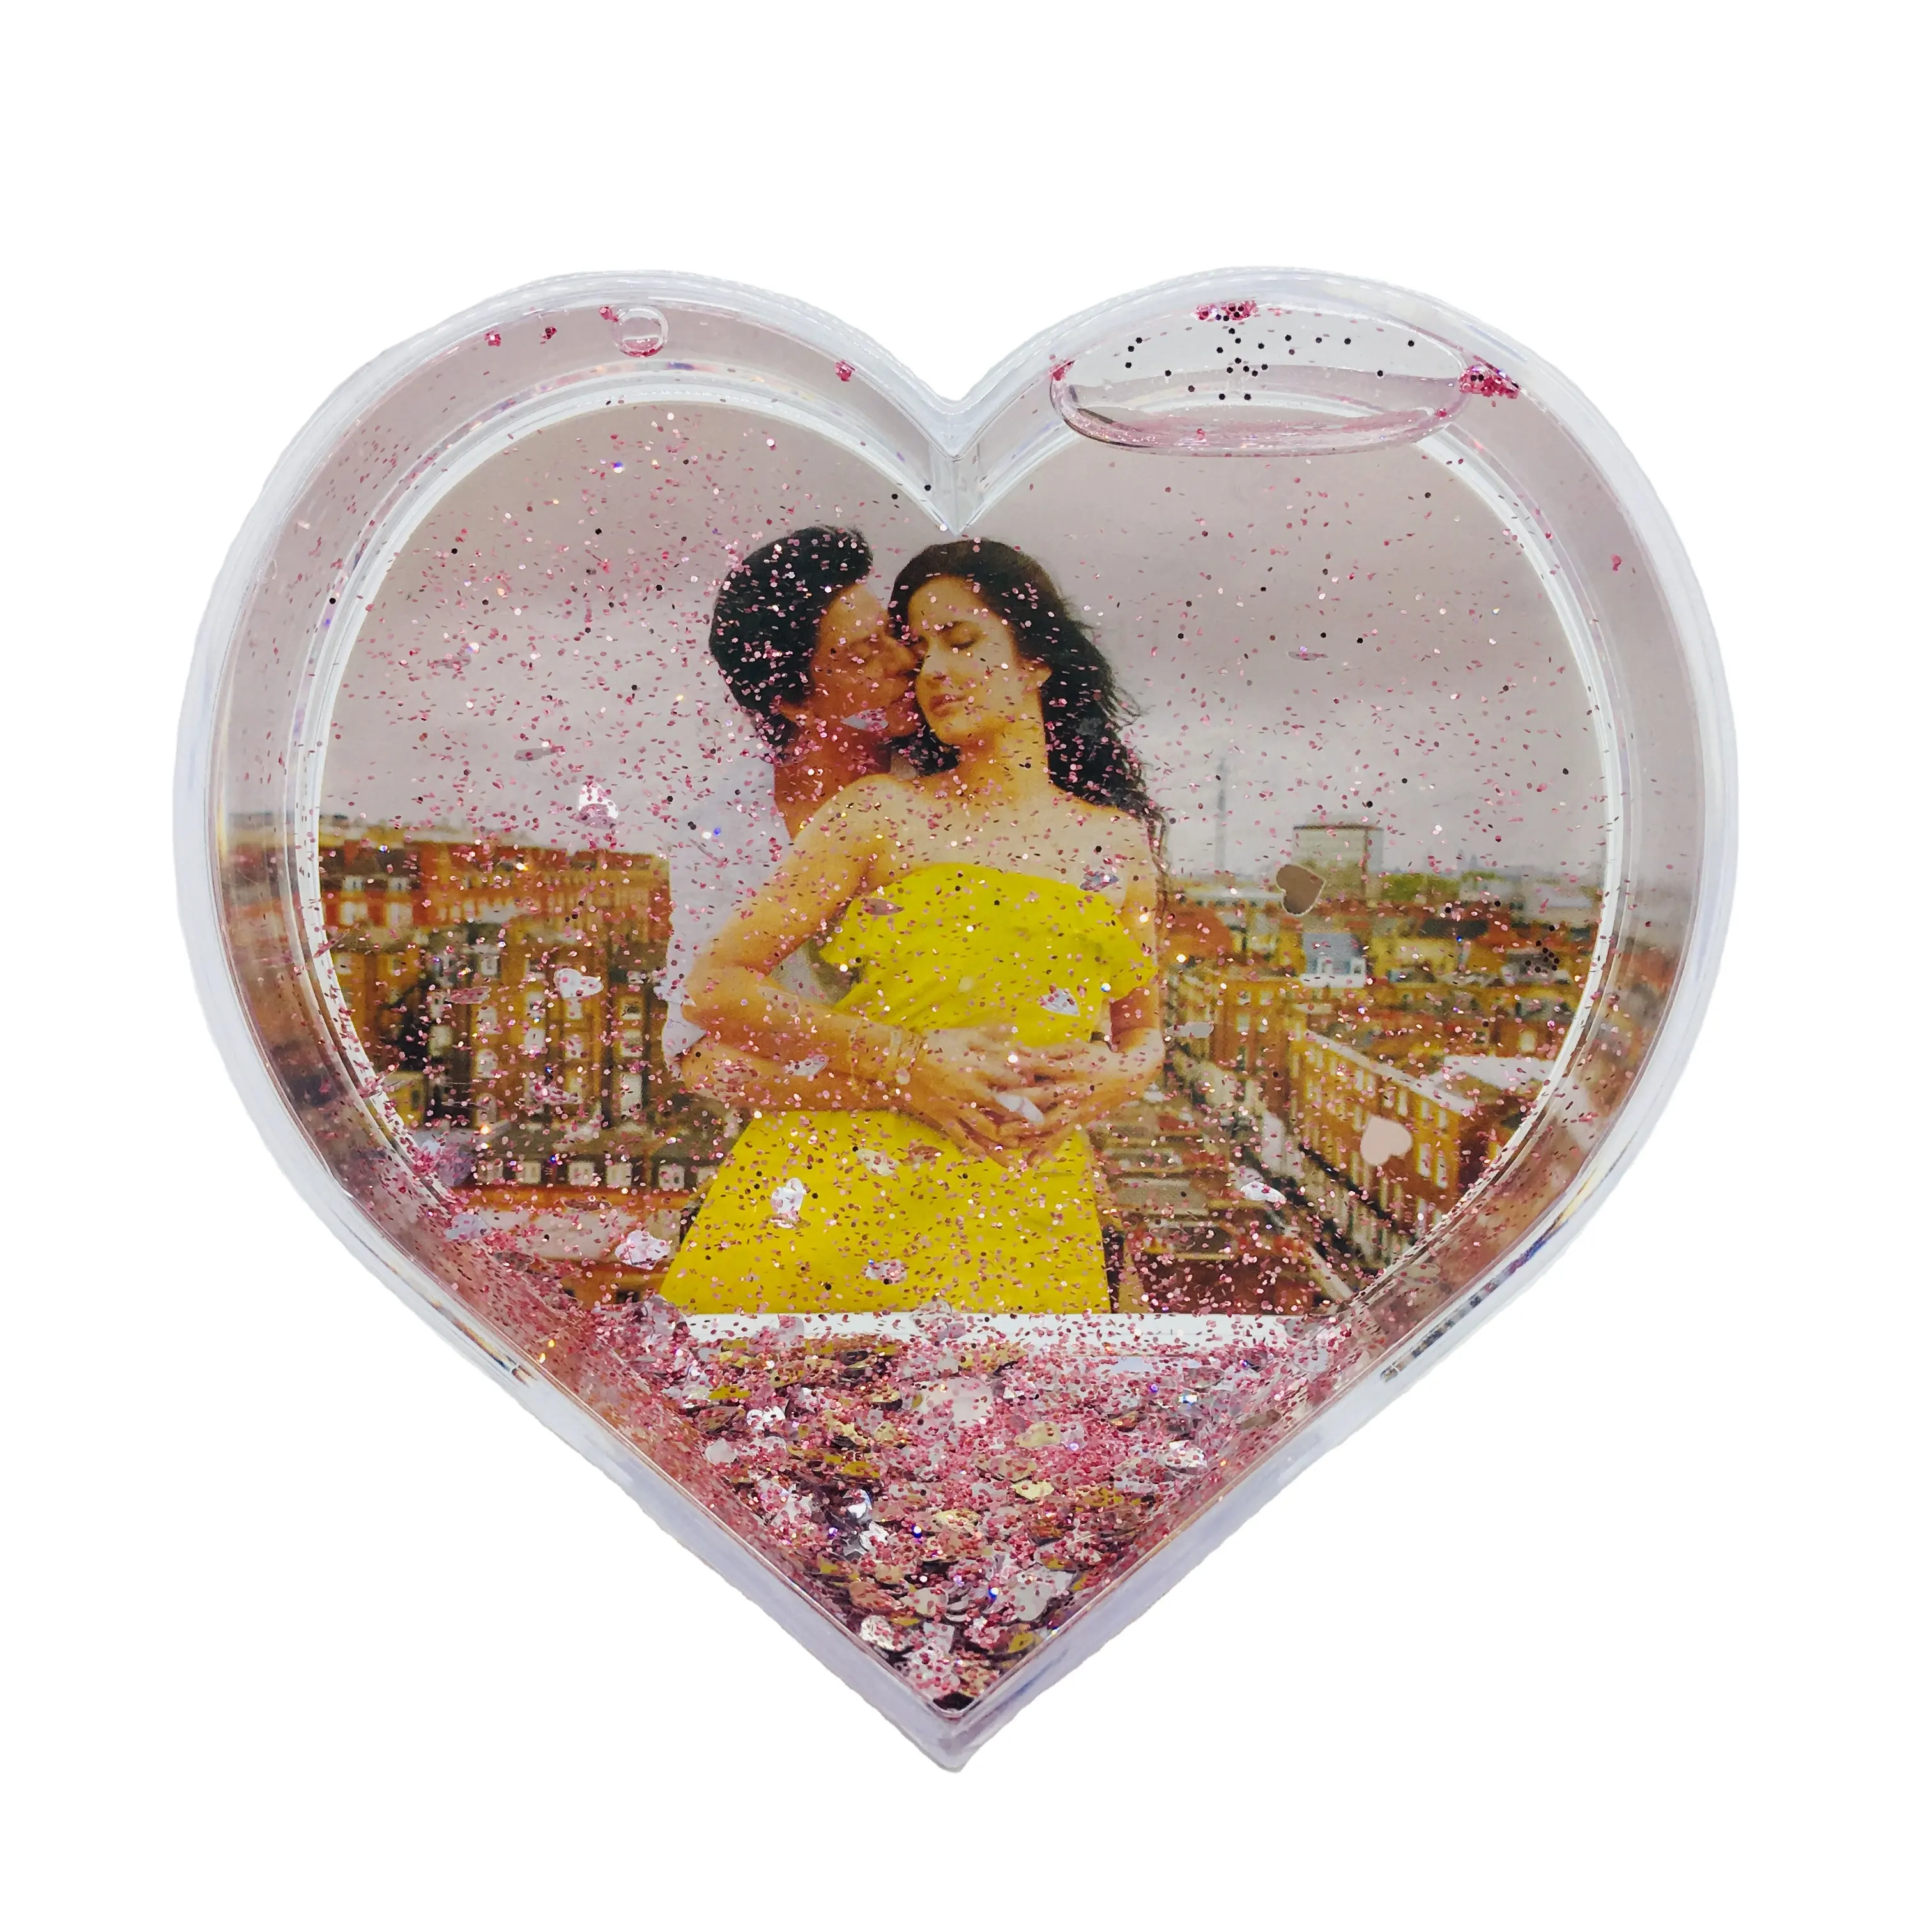 Insert acrylic photo frame with water and glitter souvenir gift heart shape photo frame